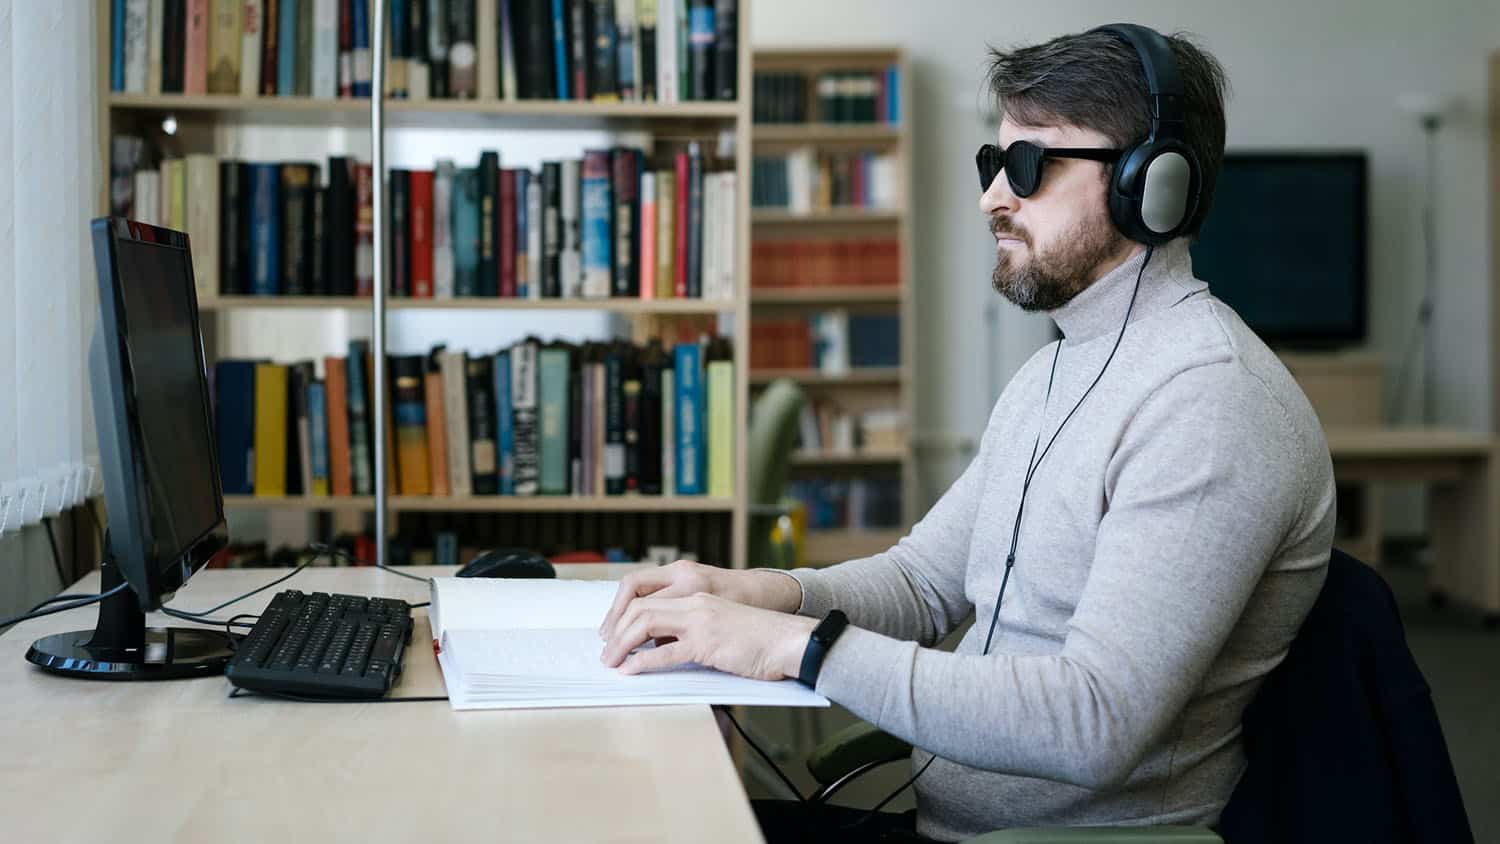 a blind man sits at a desk with a computer. he is wearing headphones and reading a book written in braille.